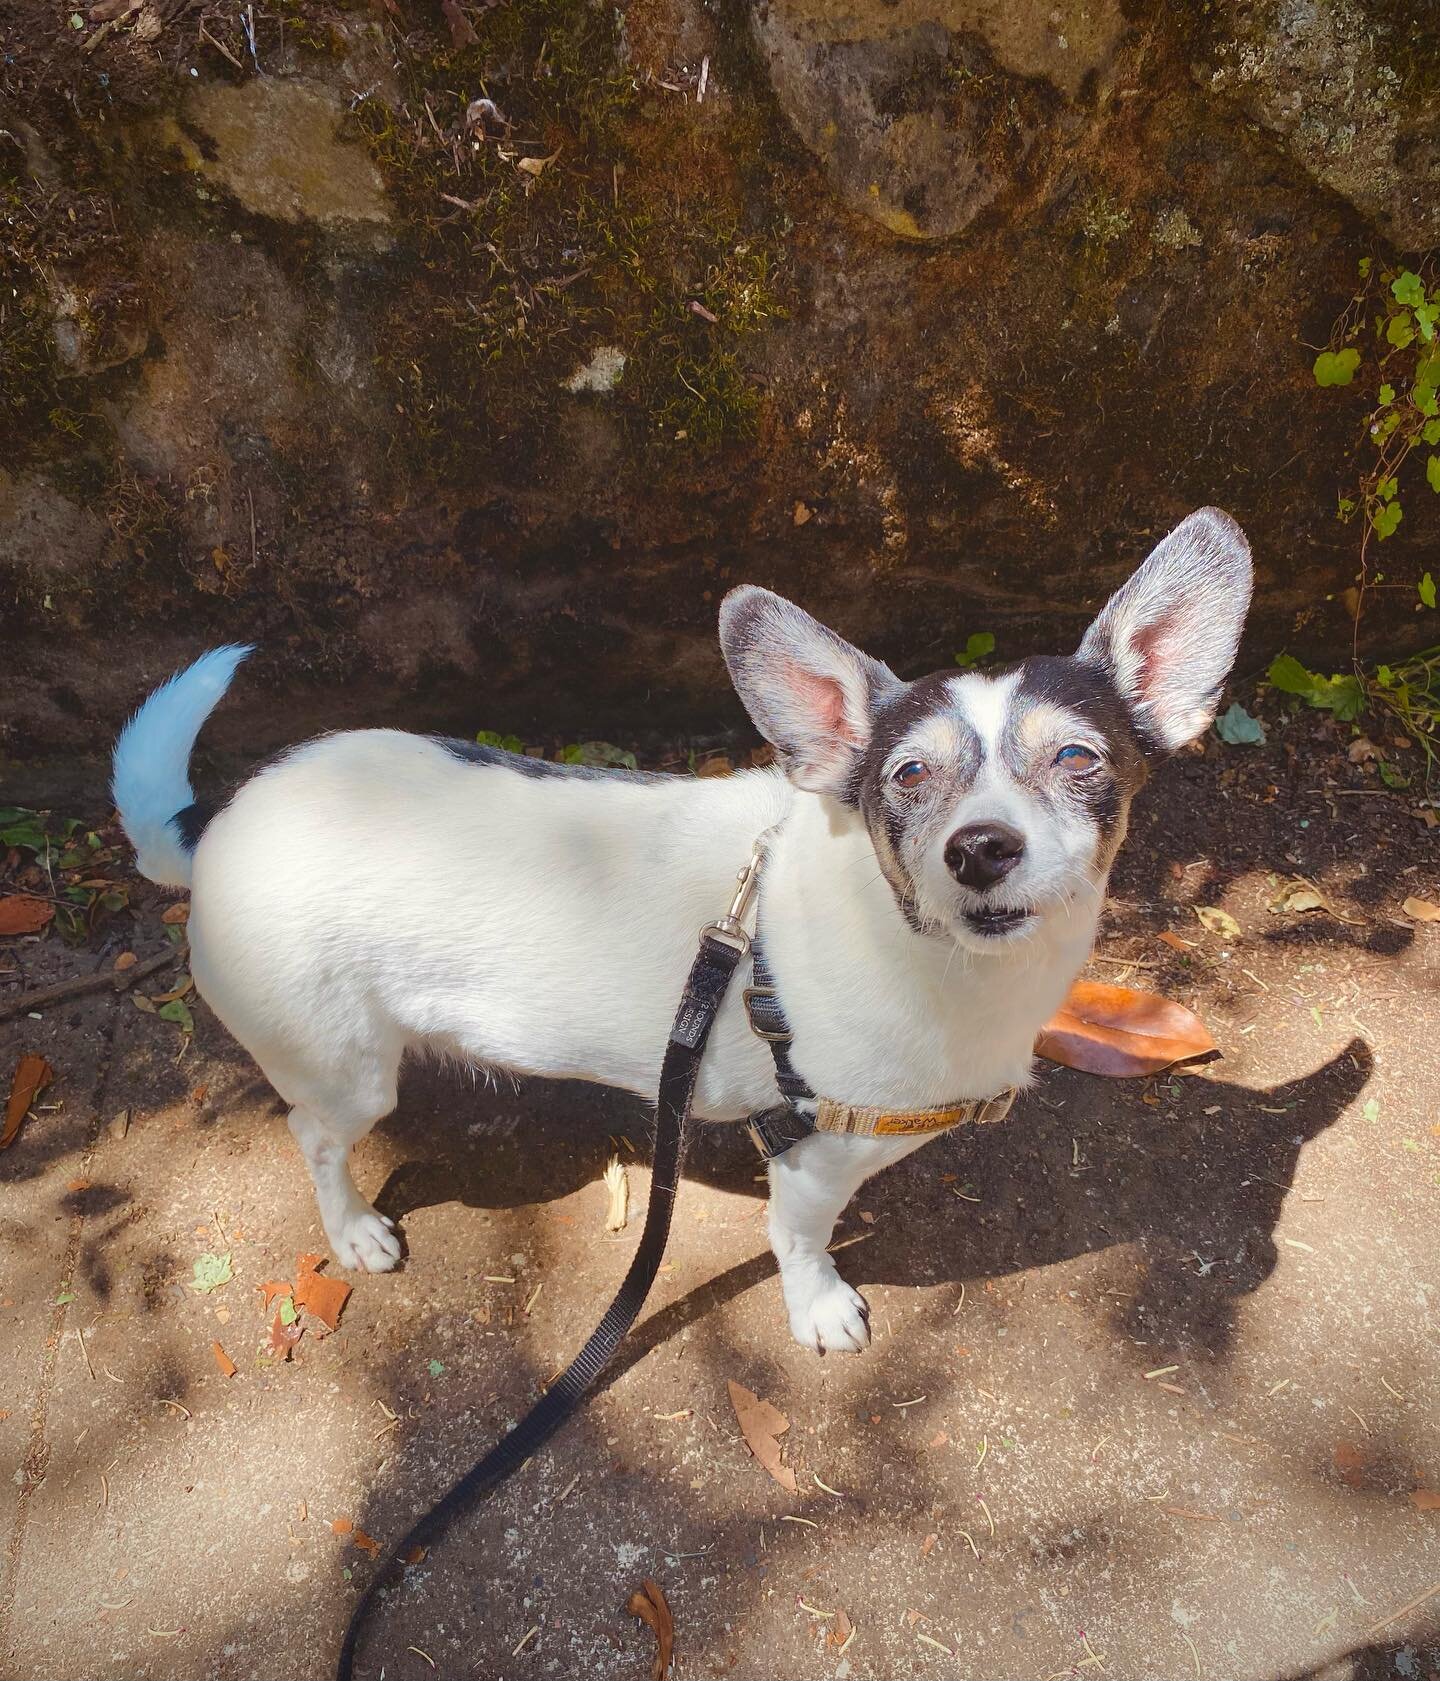 This cute little man is Boots, he is as sweet as can be! ❤️
.
.
.
#portlandoregon #portland #pdx #portlandpets #portlandpetsitter #portlanddogsitter #portlanddogwalkers #portlanddogs #portlanddog #portlanddogwalker #portlanddogadventures #portlanddog